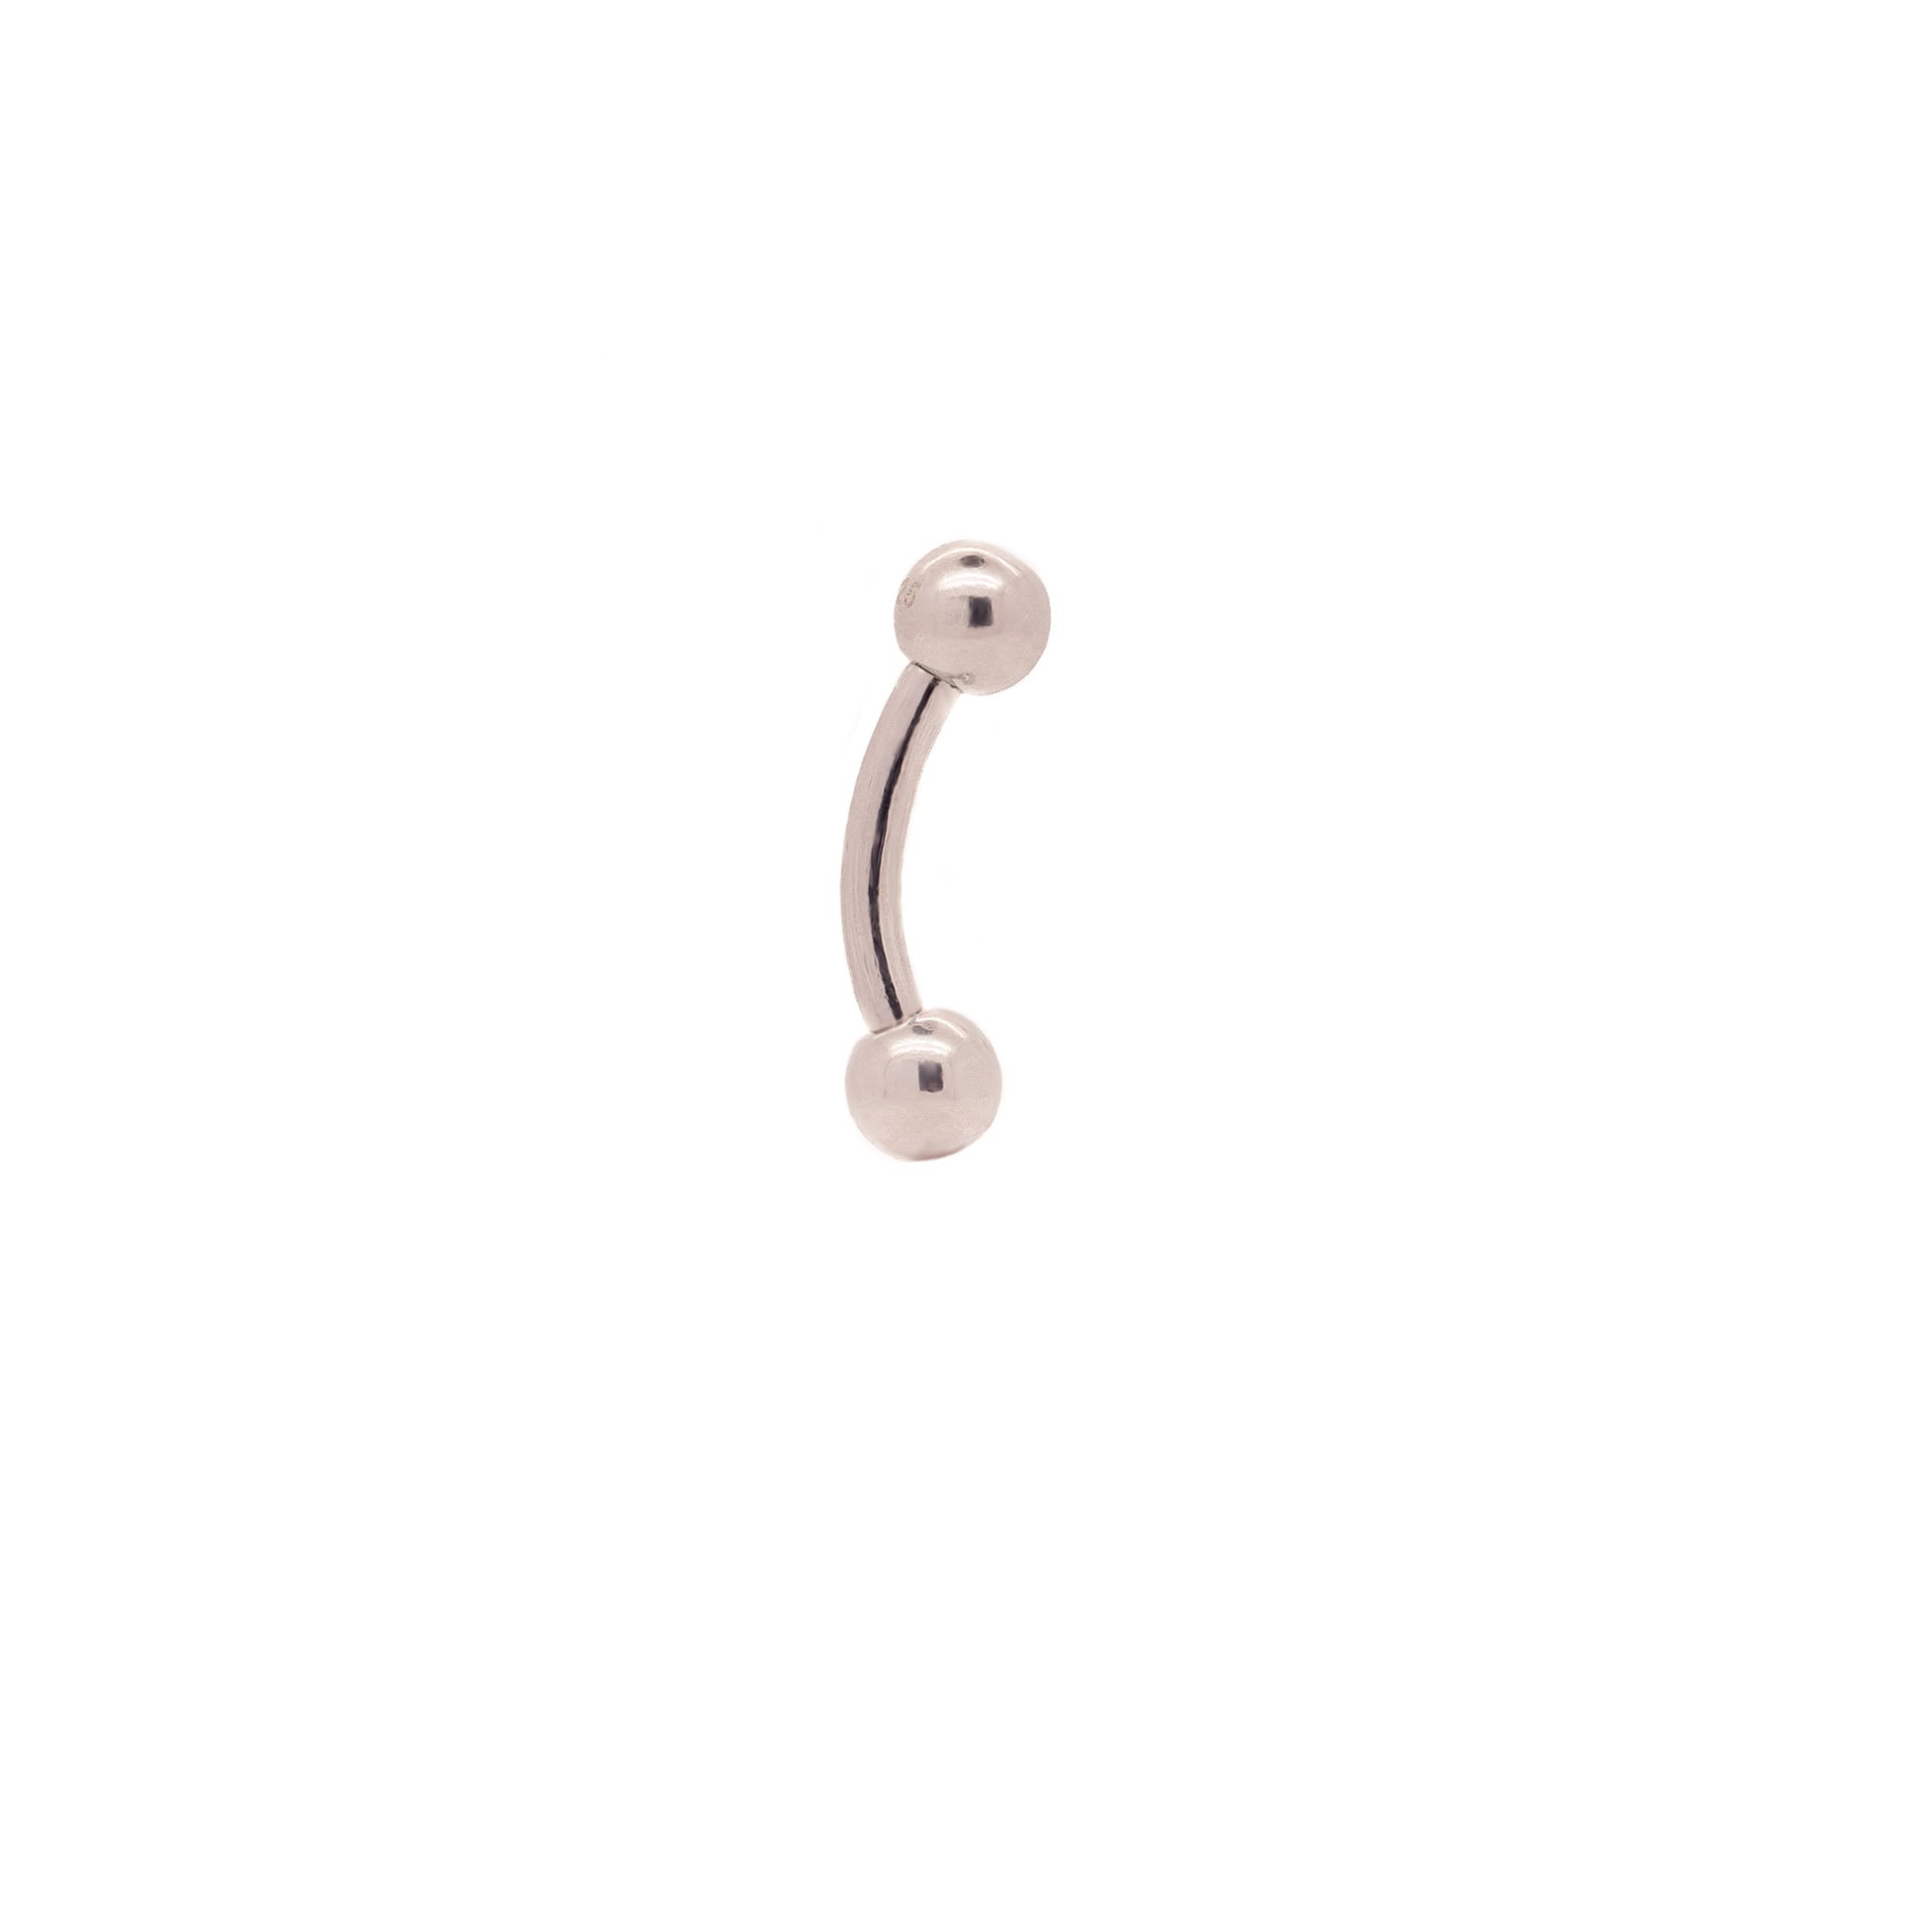 Solid 925 Silver  16G 14G 4mm Petite Ball Combination Curved